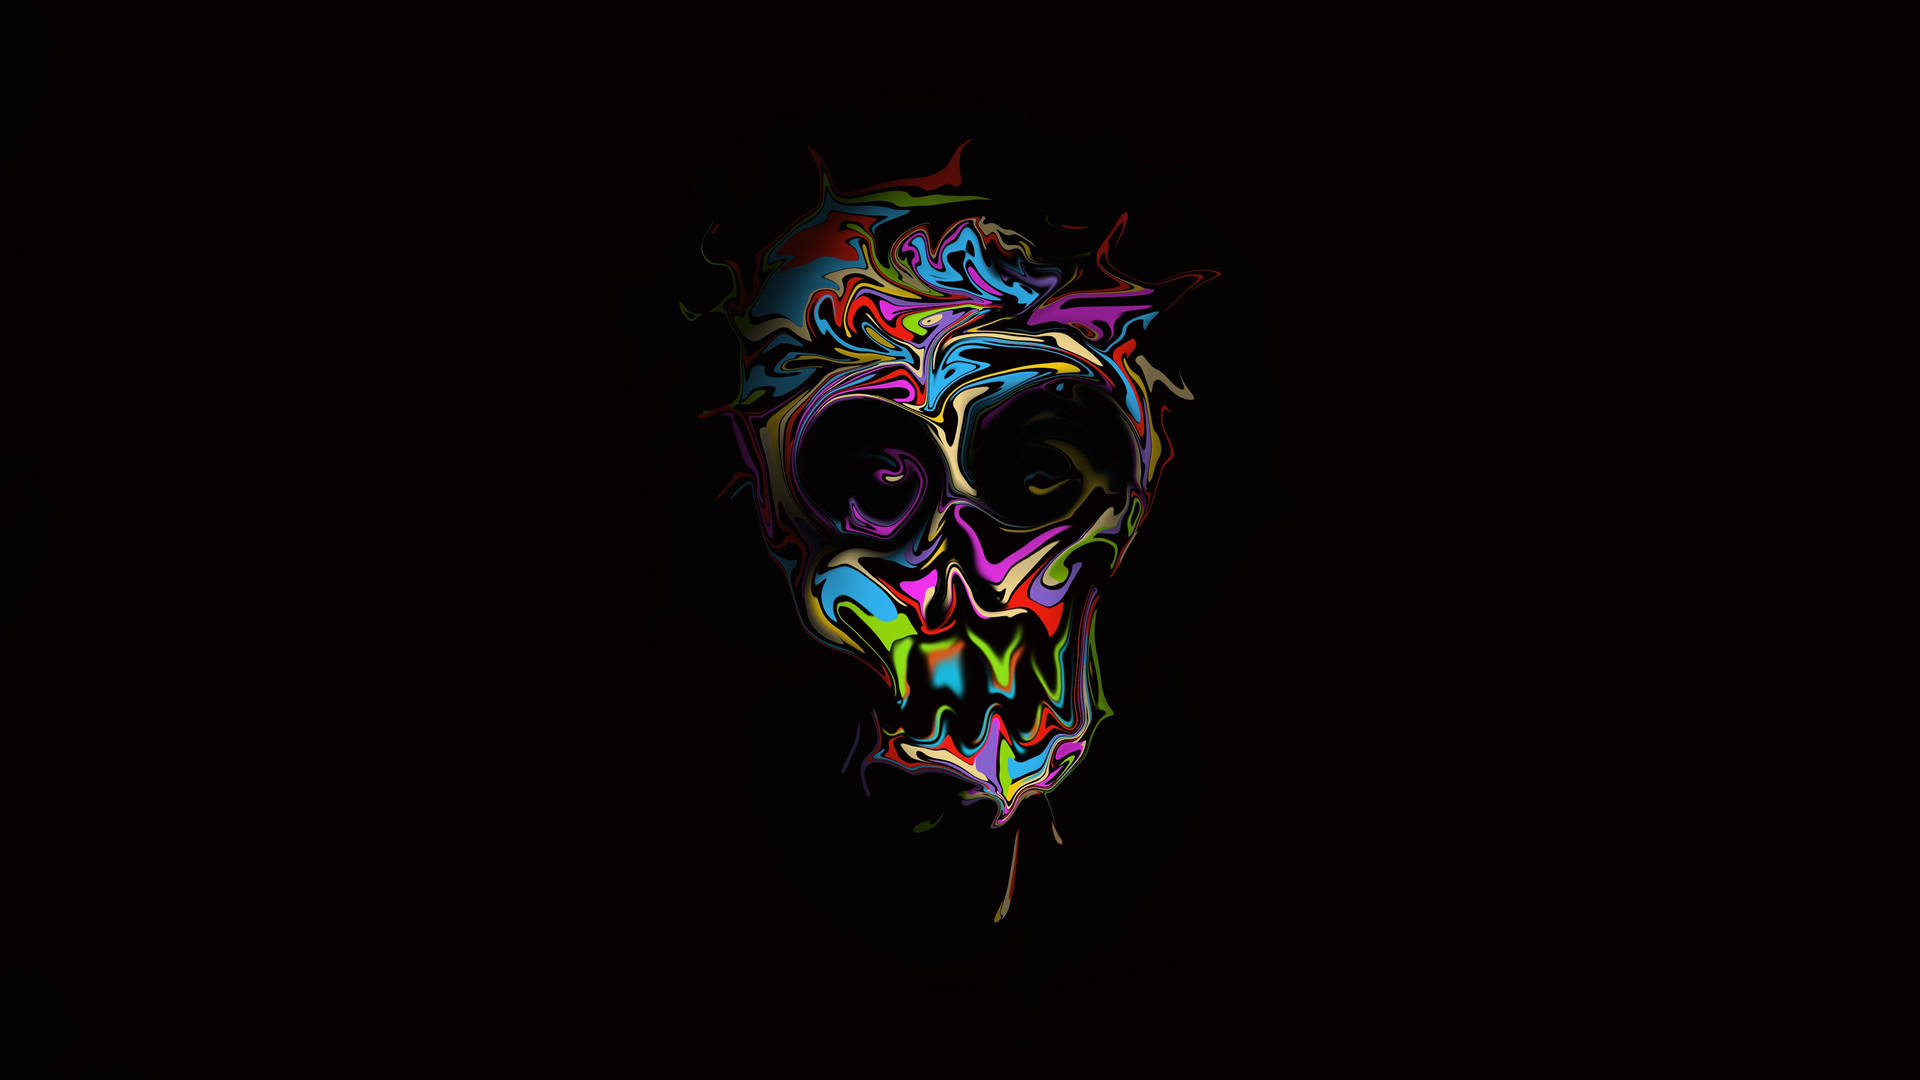 Colorful Skull With Swirl Effects Wallpaper